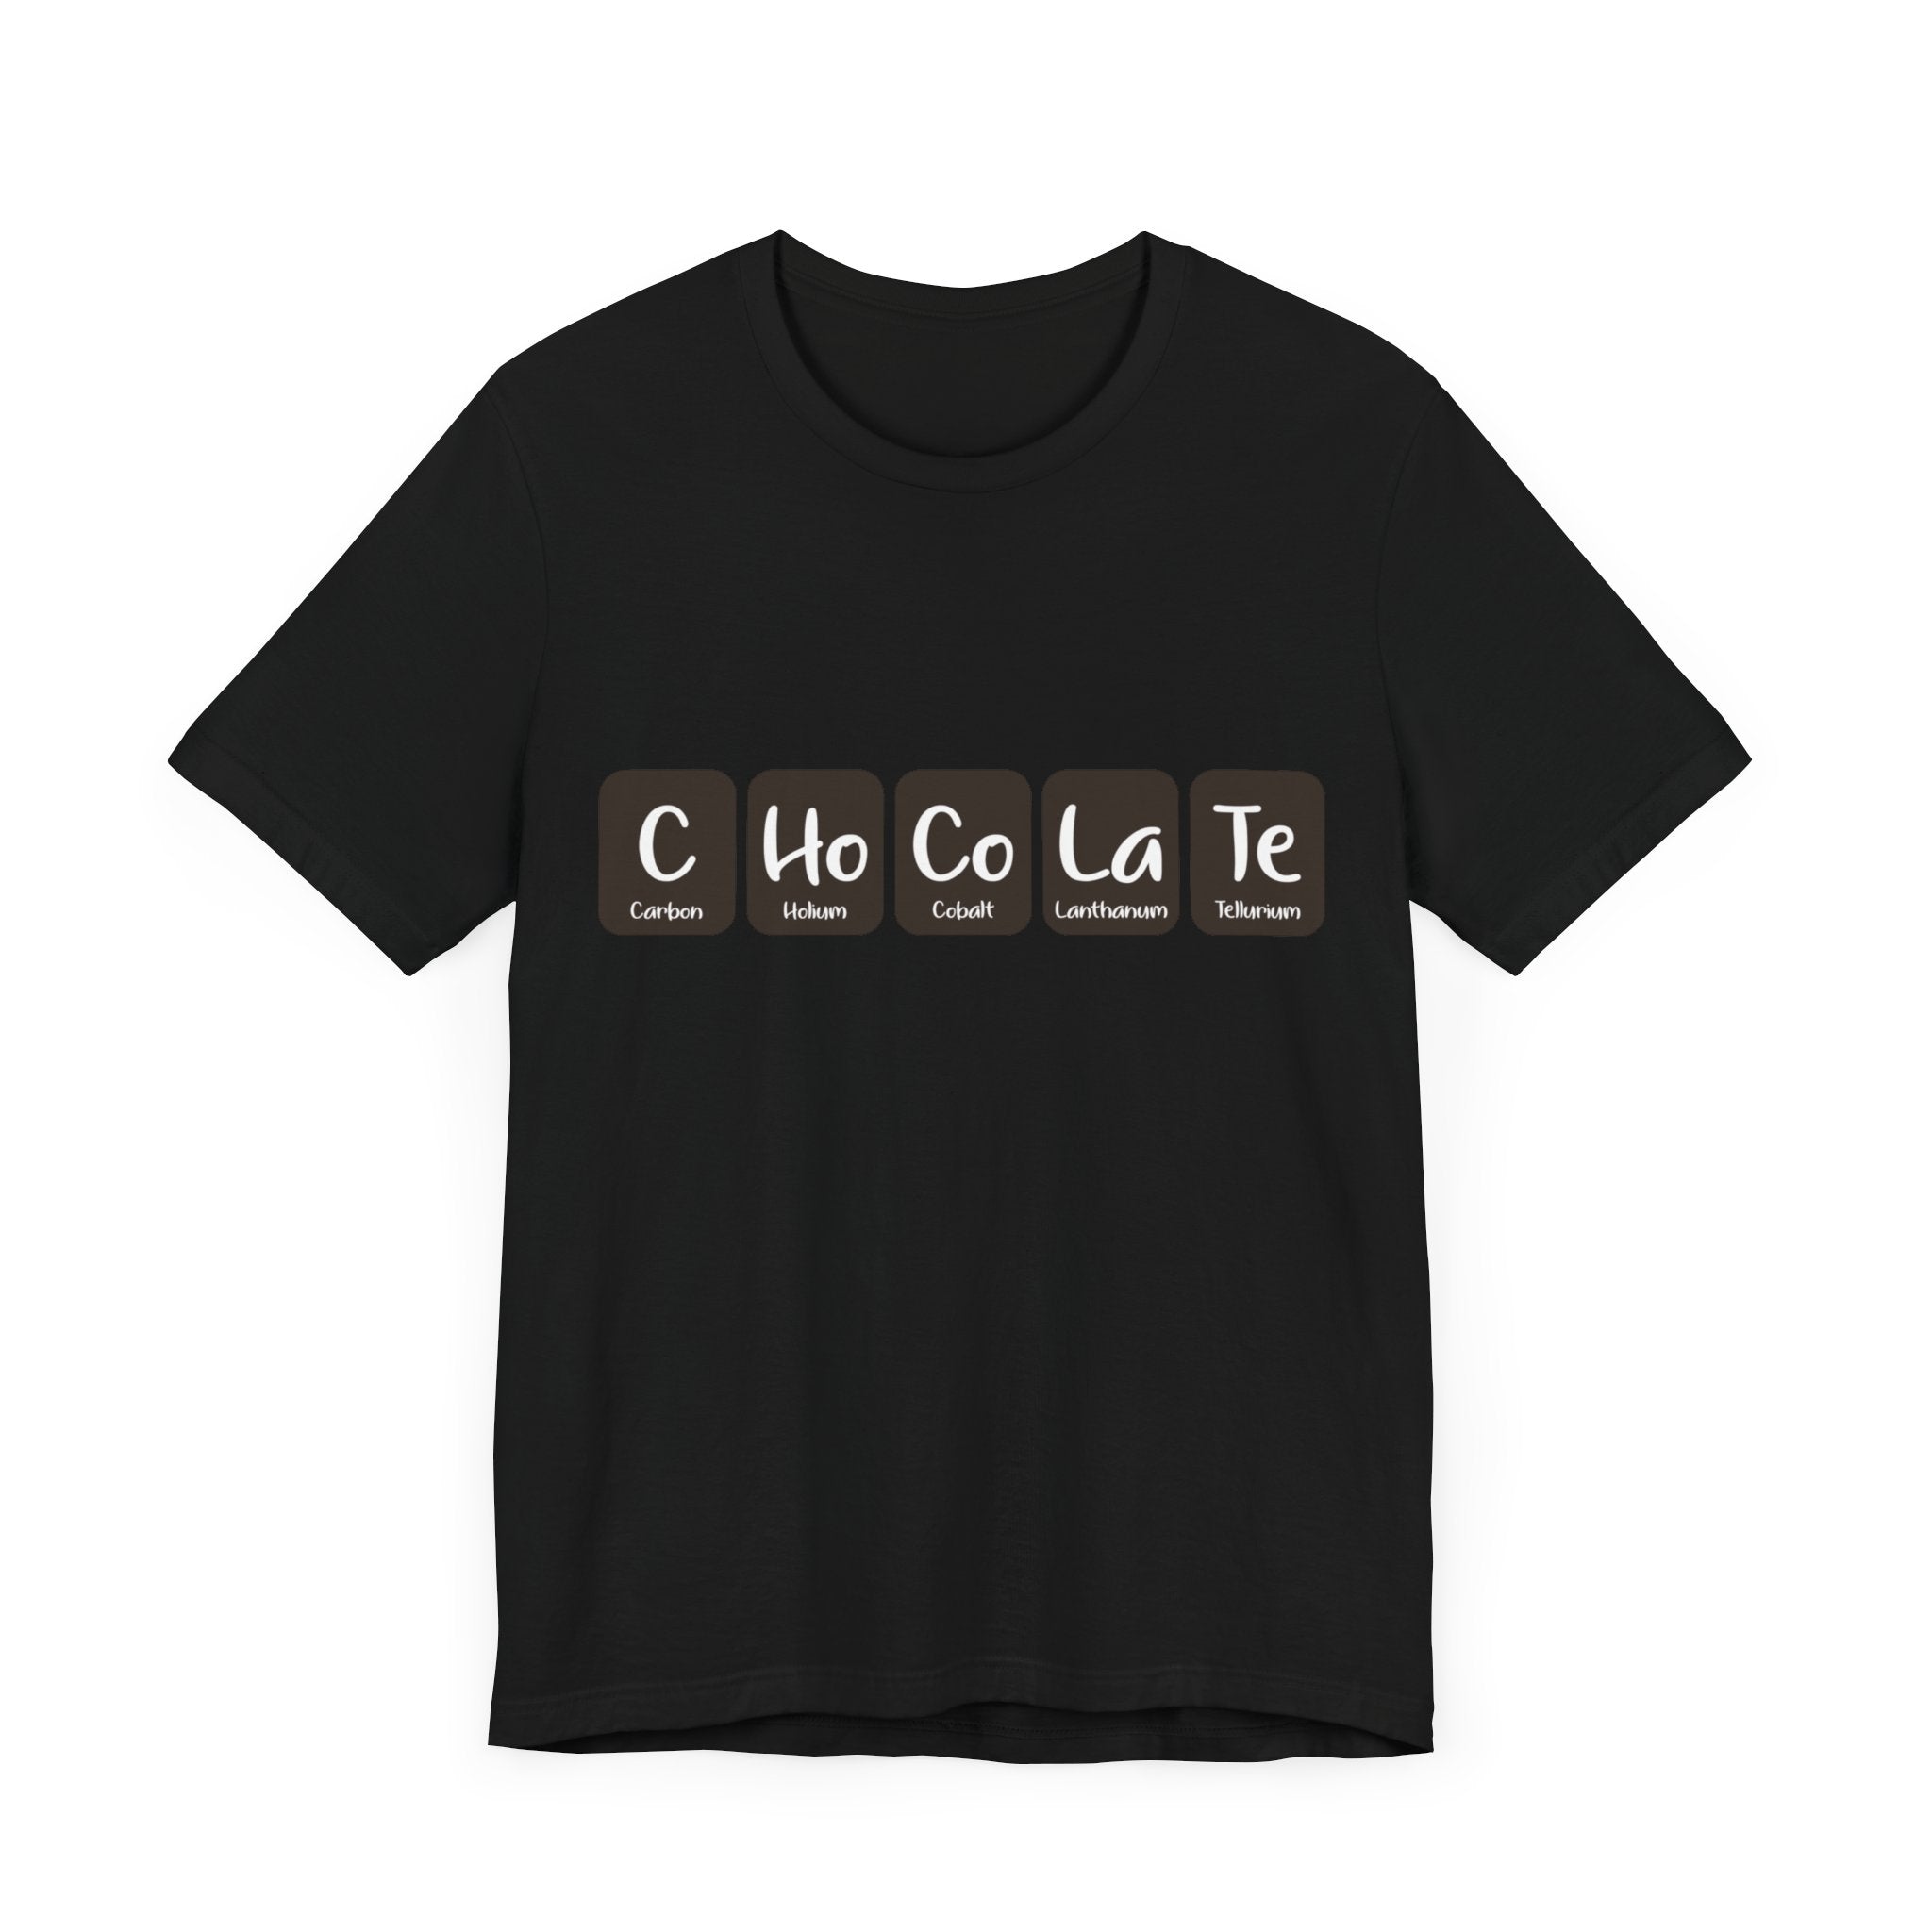 The C-Ho-Co-La-Te - T-Shirt is a stylish black T-shirt featuring the C-Ho-Co-La-Te design, which spells "CHOCOLATE" using chemical element symbols for Carbon, Holmium, Cobalt, Lanthanum, and Tellurium. Made from 100% Airlume cotton for ultimate comfort.